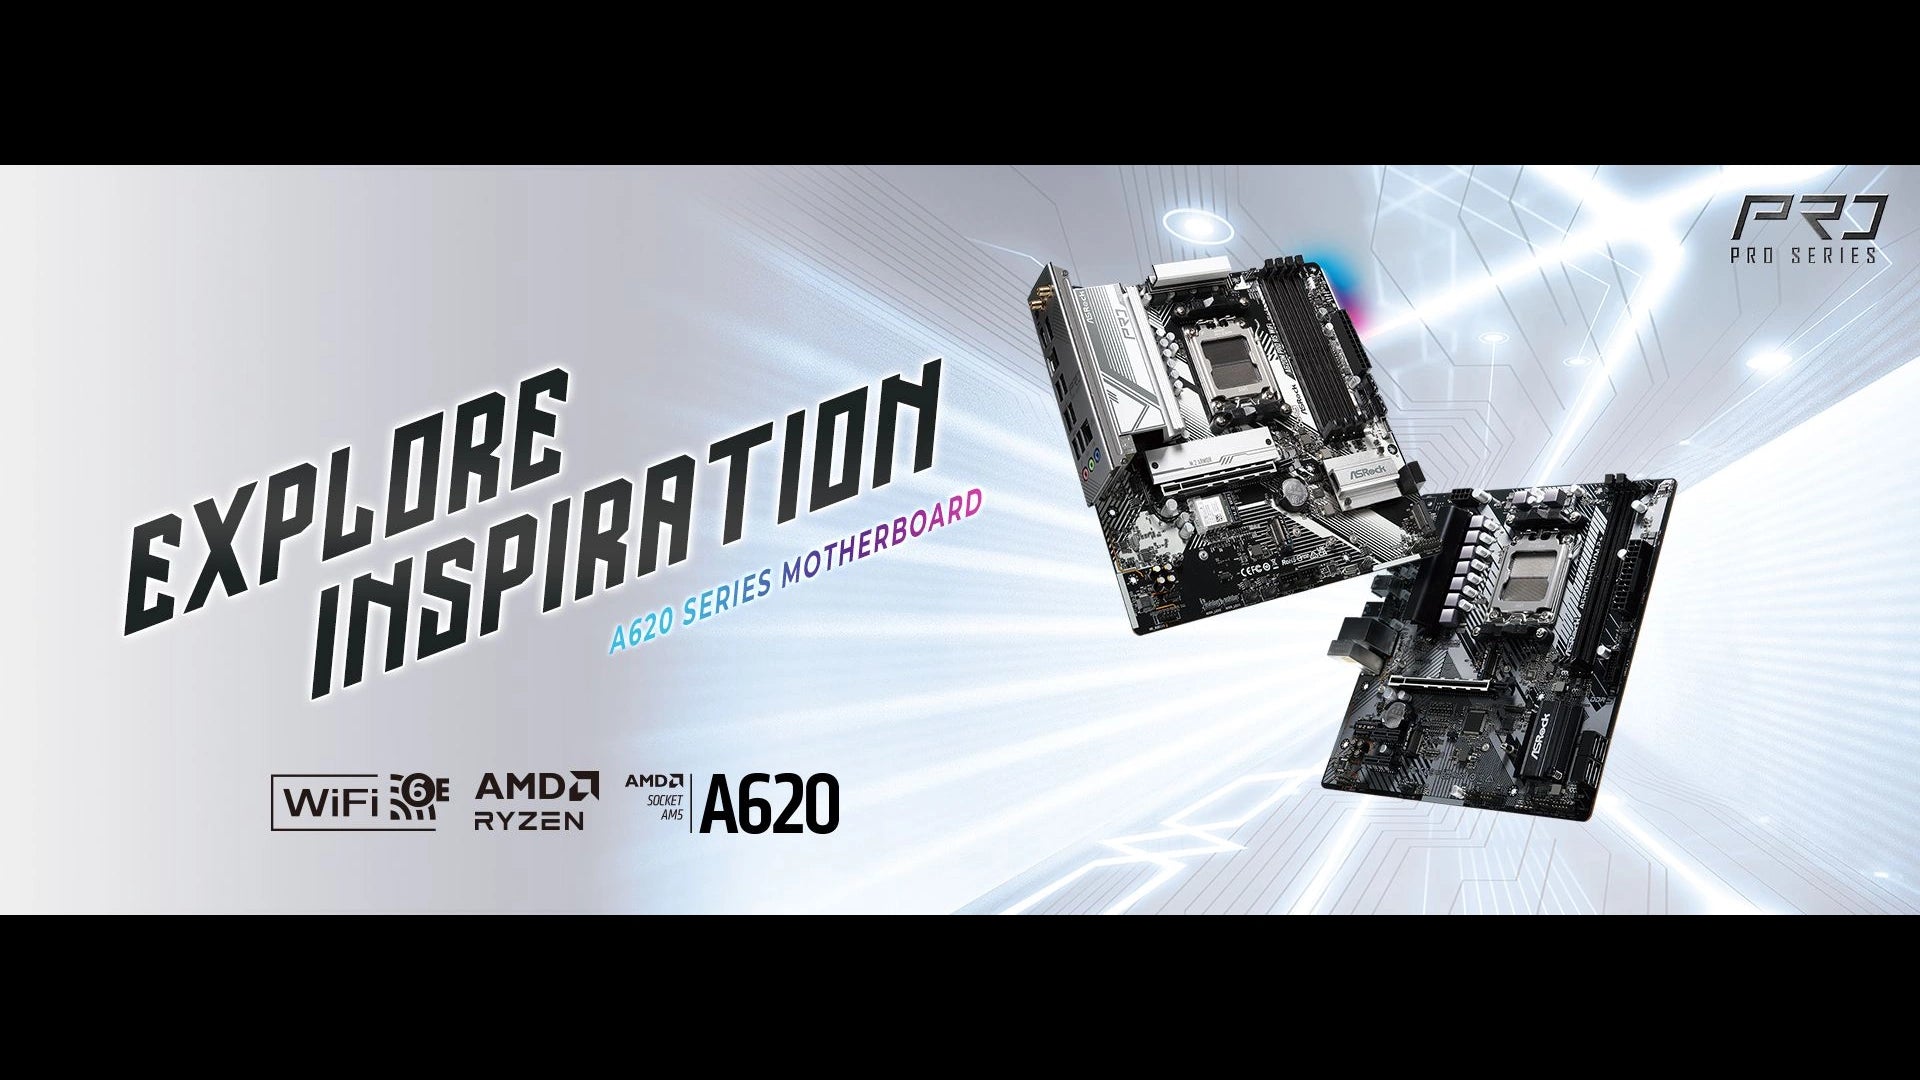 ASRock Launches AMD A620 Motherboards with Outstanding Capability and Affordability